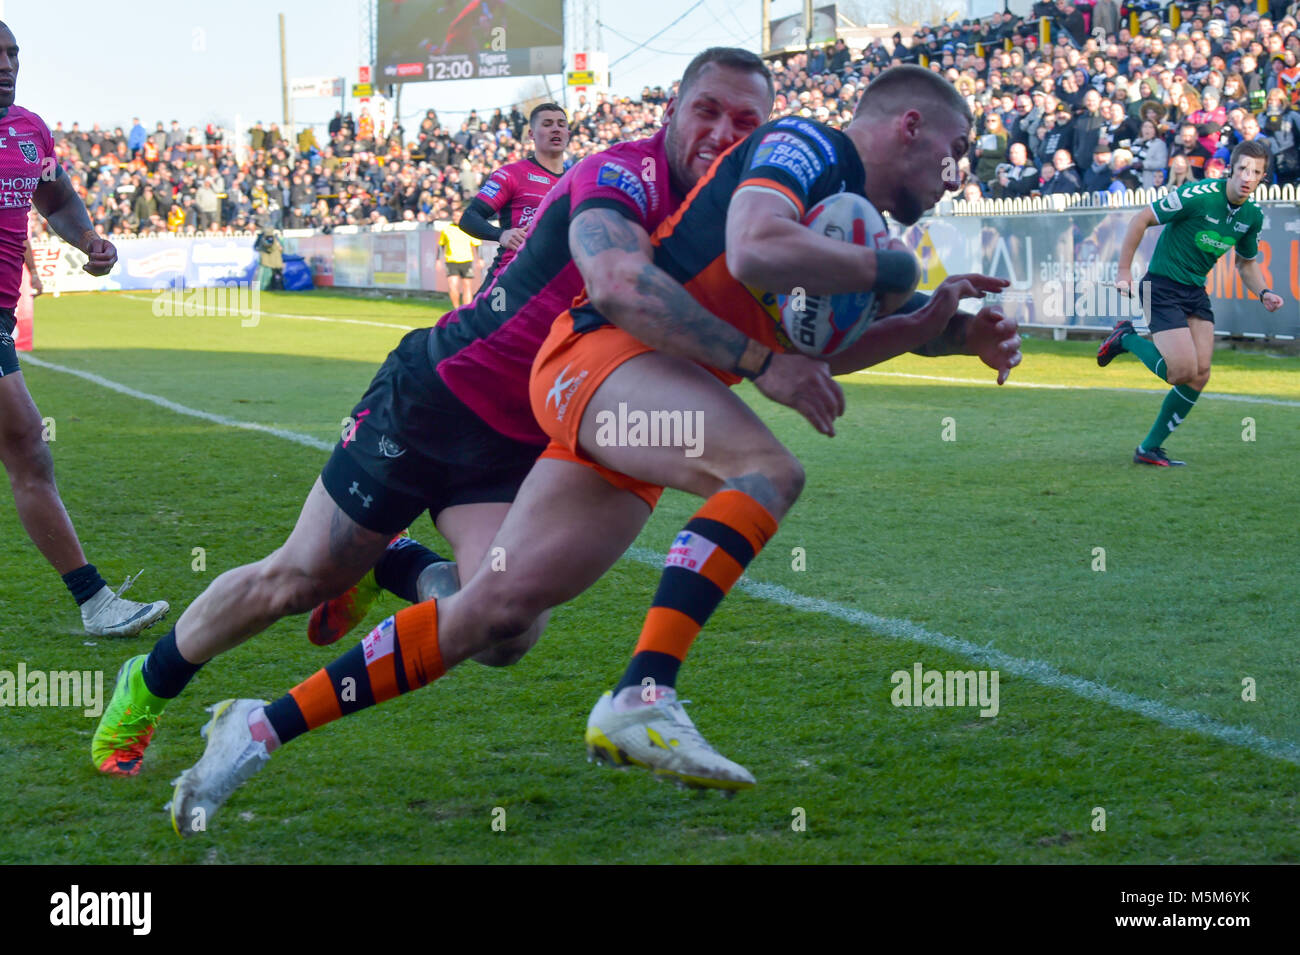 24th February 2018 , Mend-A-Hose Jungle, Castleford, England; Betfred Super League rugby, Castleford Tigers versus Hull FC; Greg Minikin goes to score a try tackled by Hull FC's Josh Griffin Stock Photo